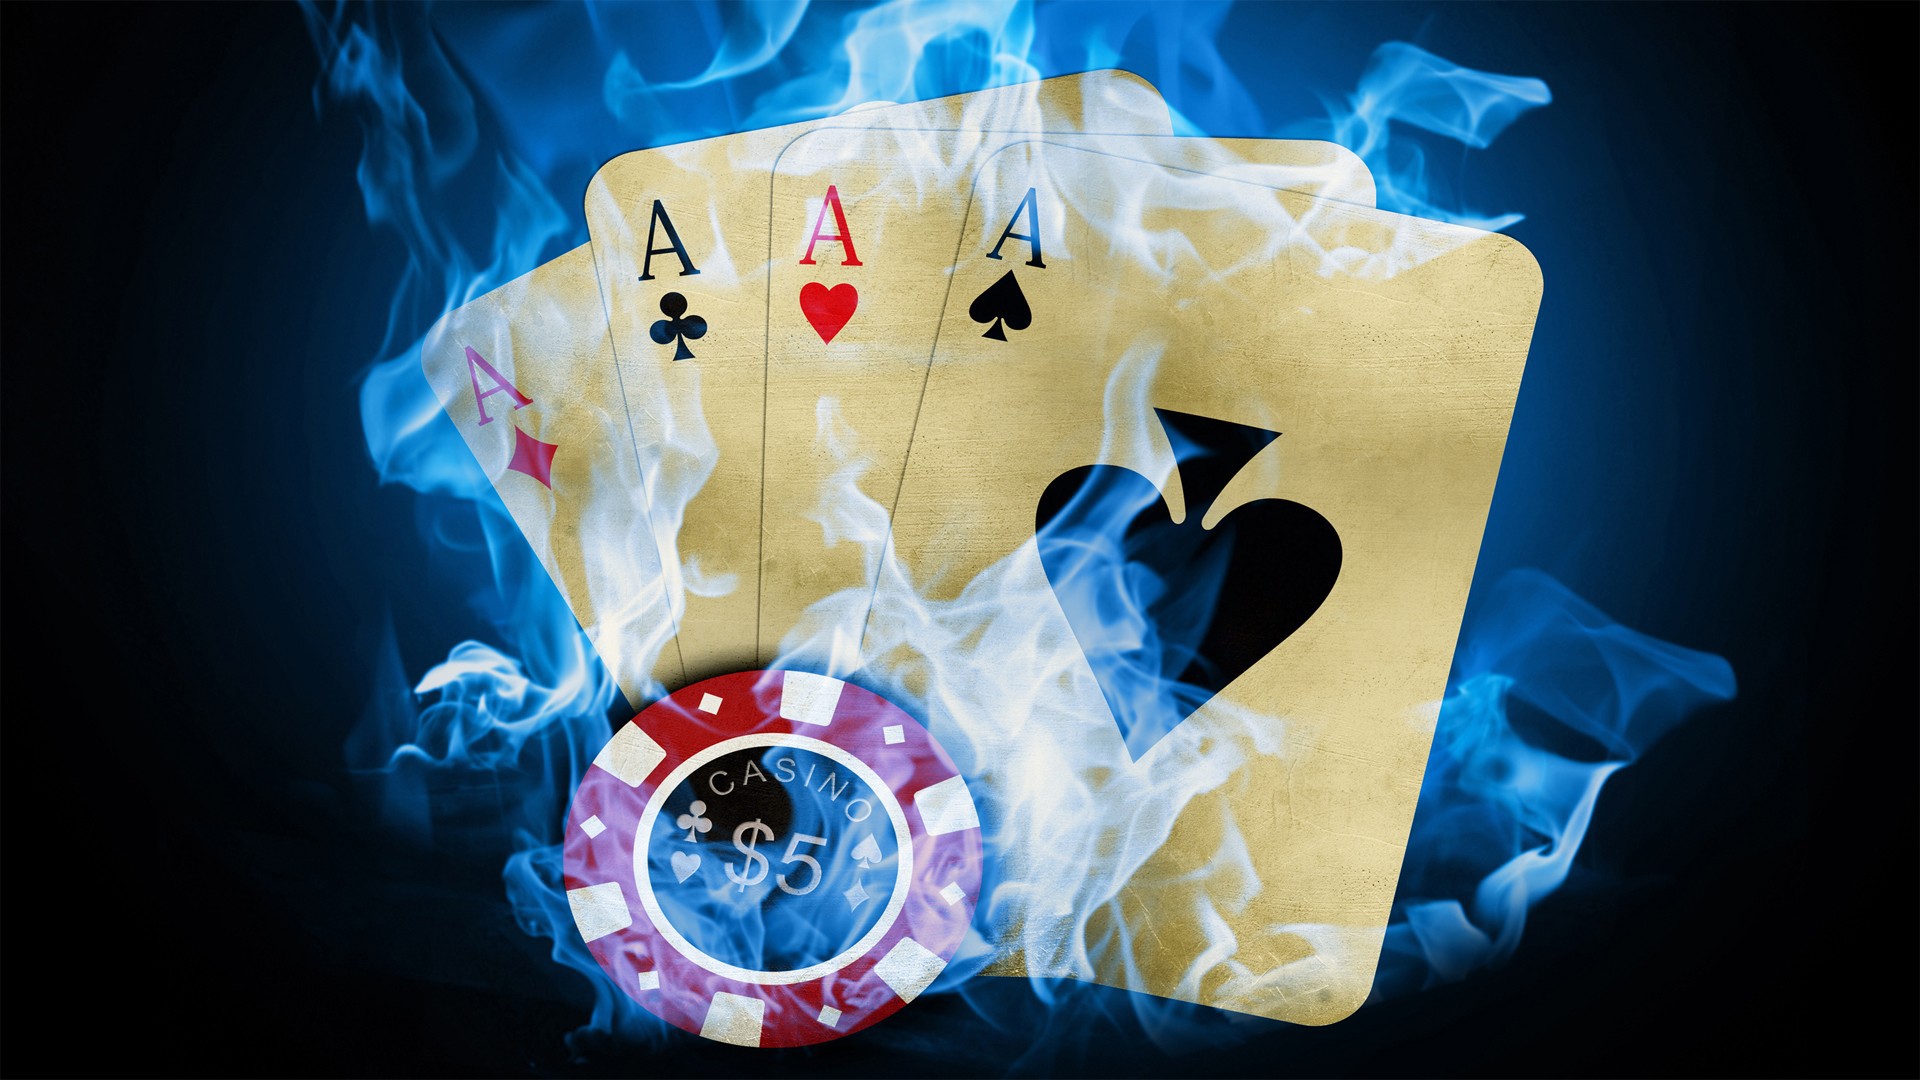 There are many benefits to playing poker online